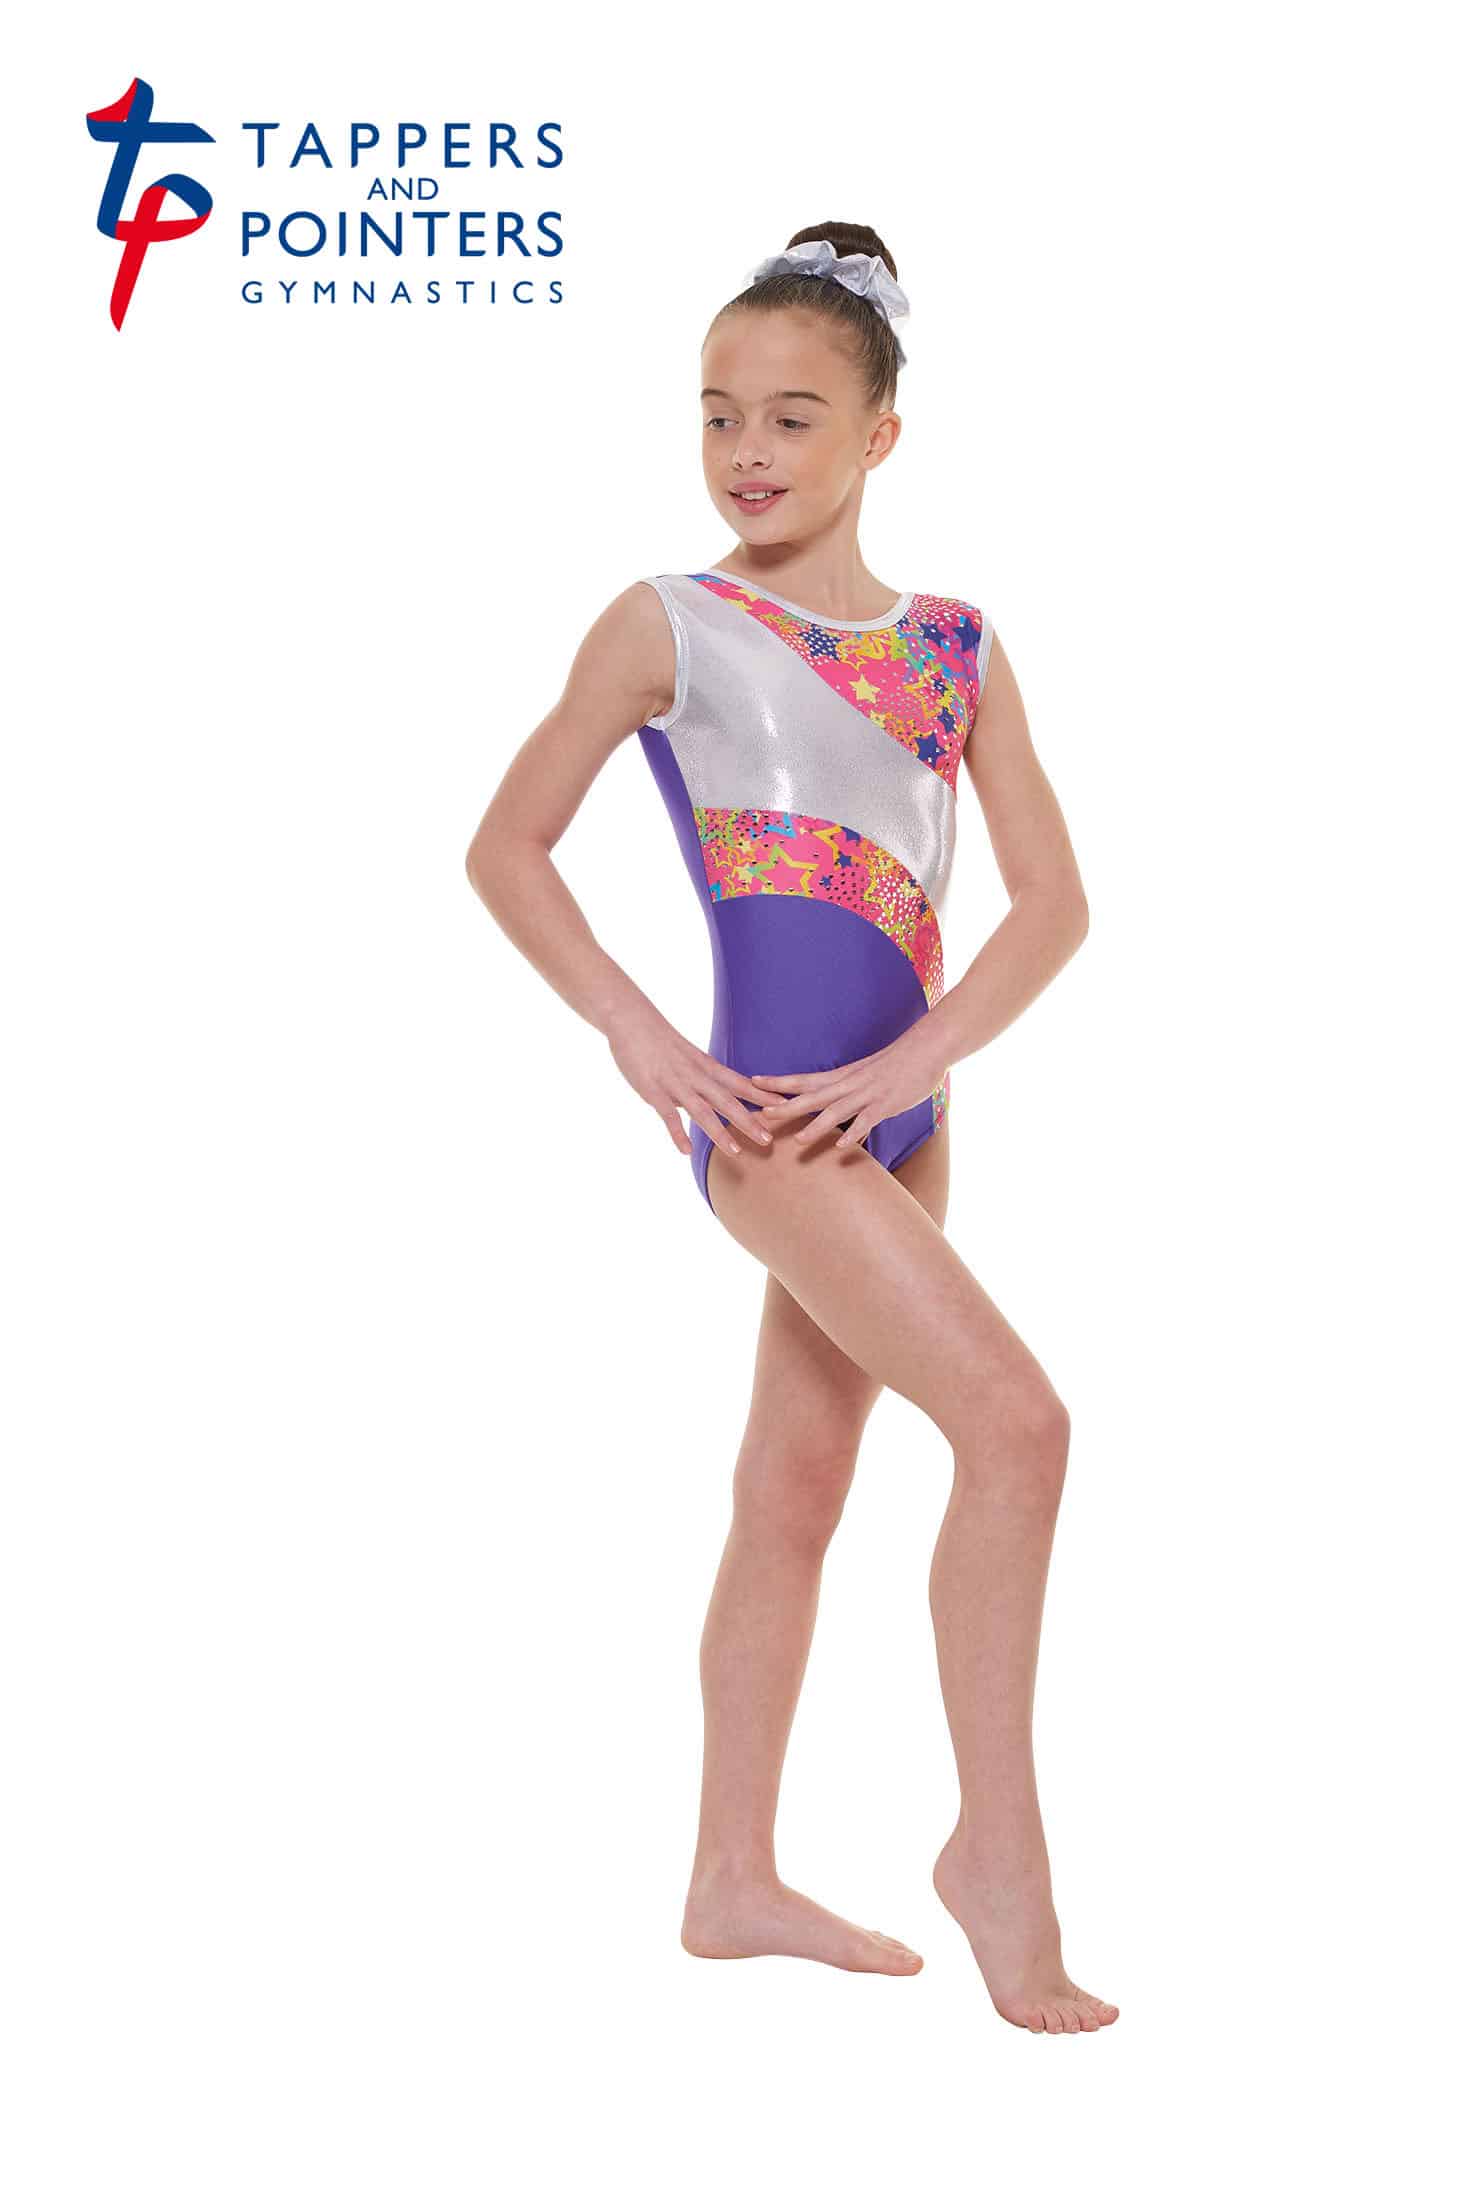 Tappers and Pointers Gymnastics Leotard PLUS Matching Hair Scrunchie Pink Gym 39 